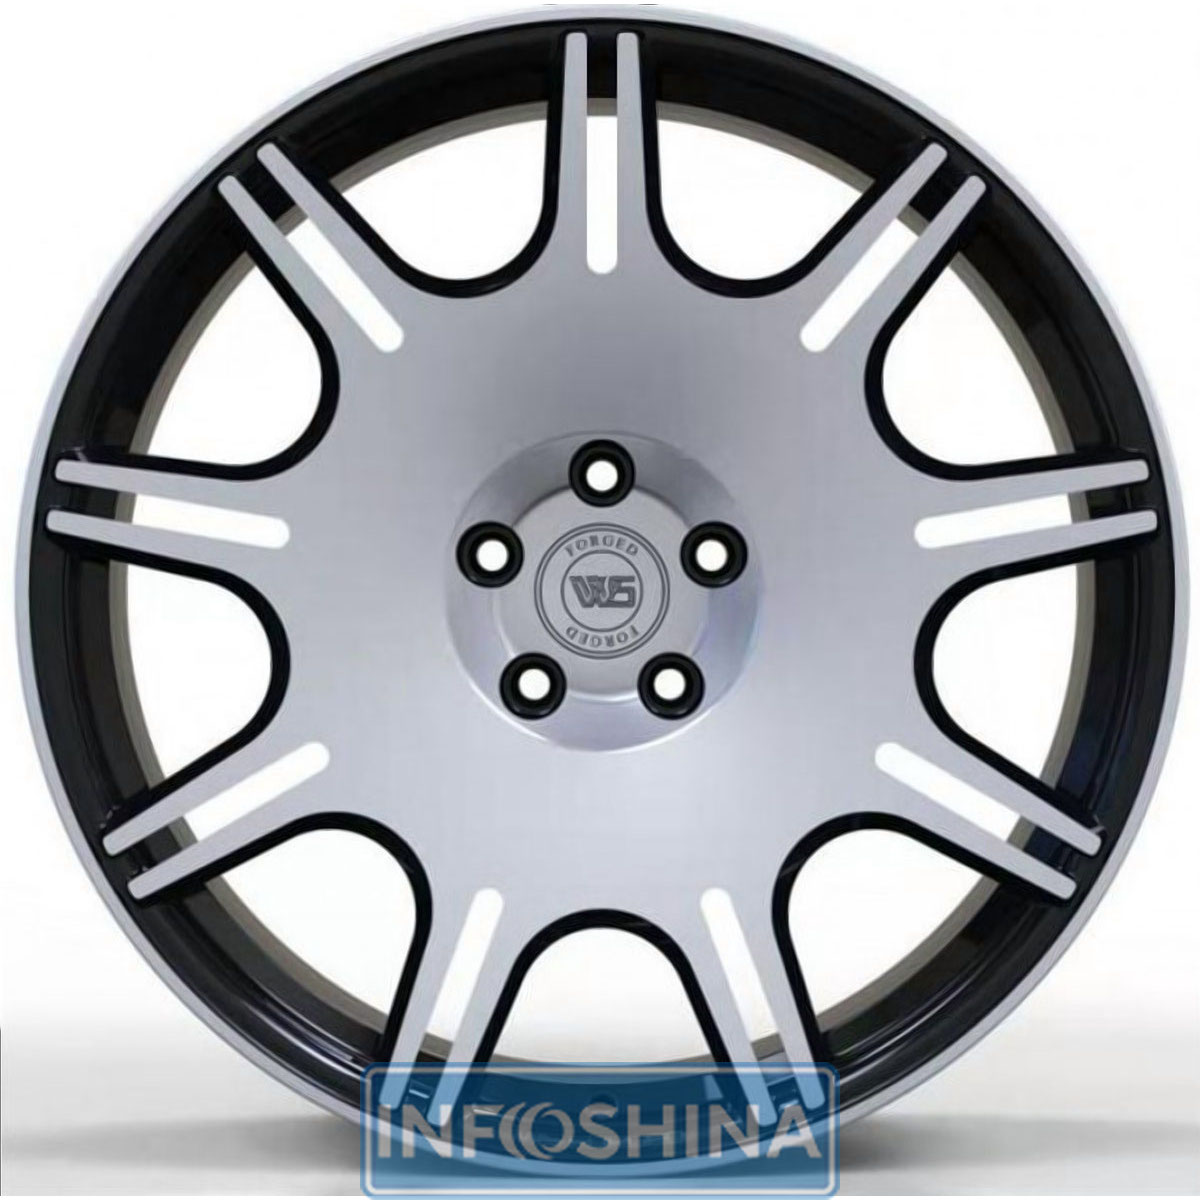 Купить диски WS Forged WS1249 Gloss Black With Machined Face R21 W9 PCD5x112 ET36 DIA66.6